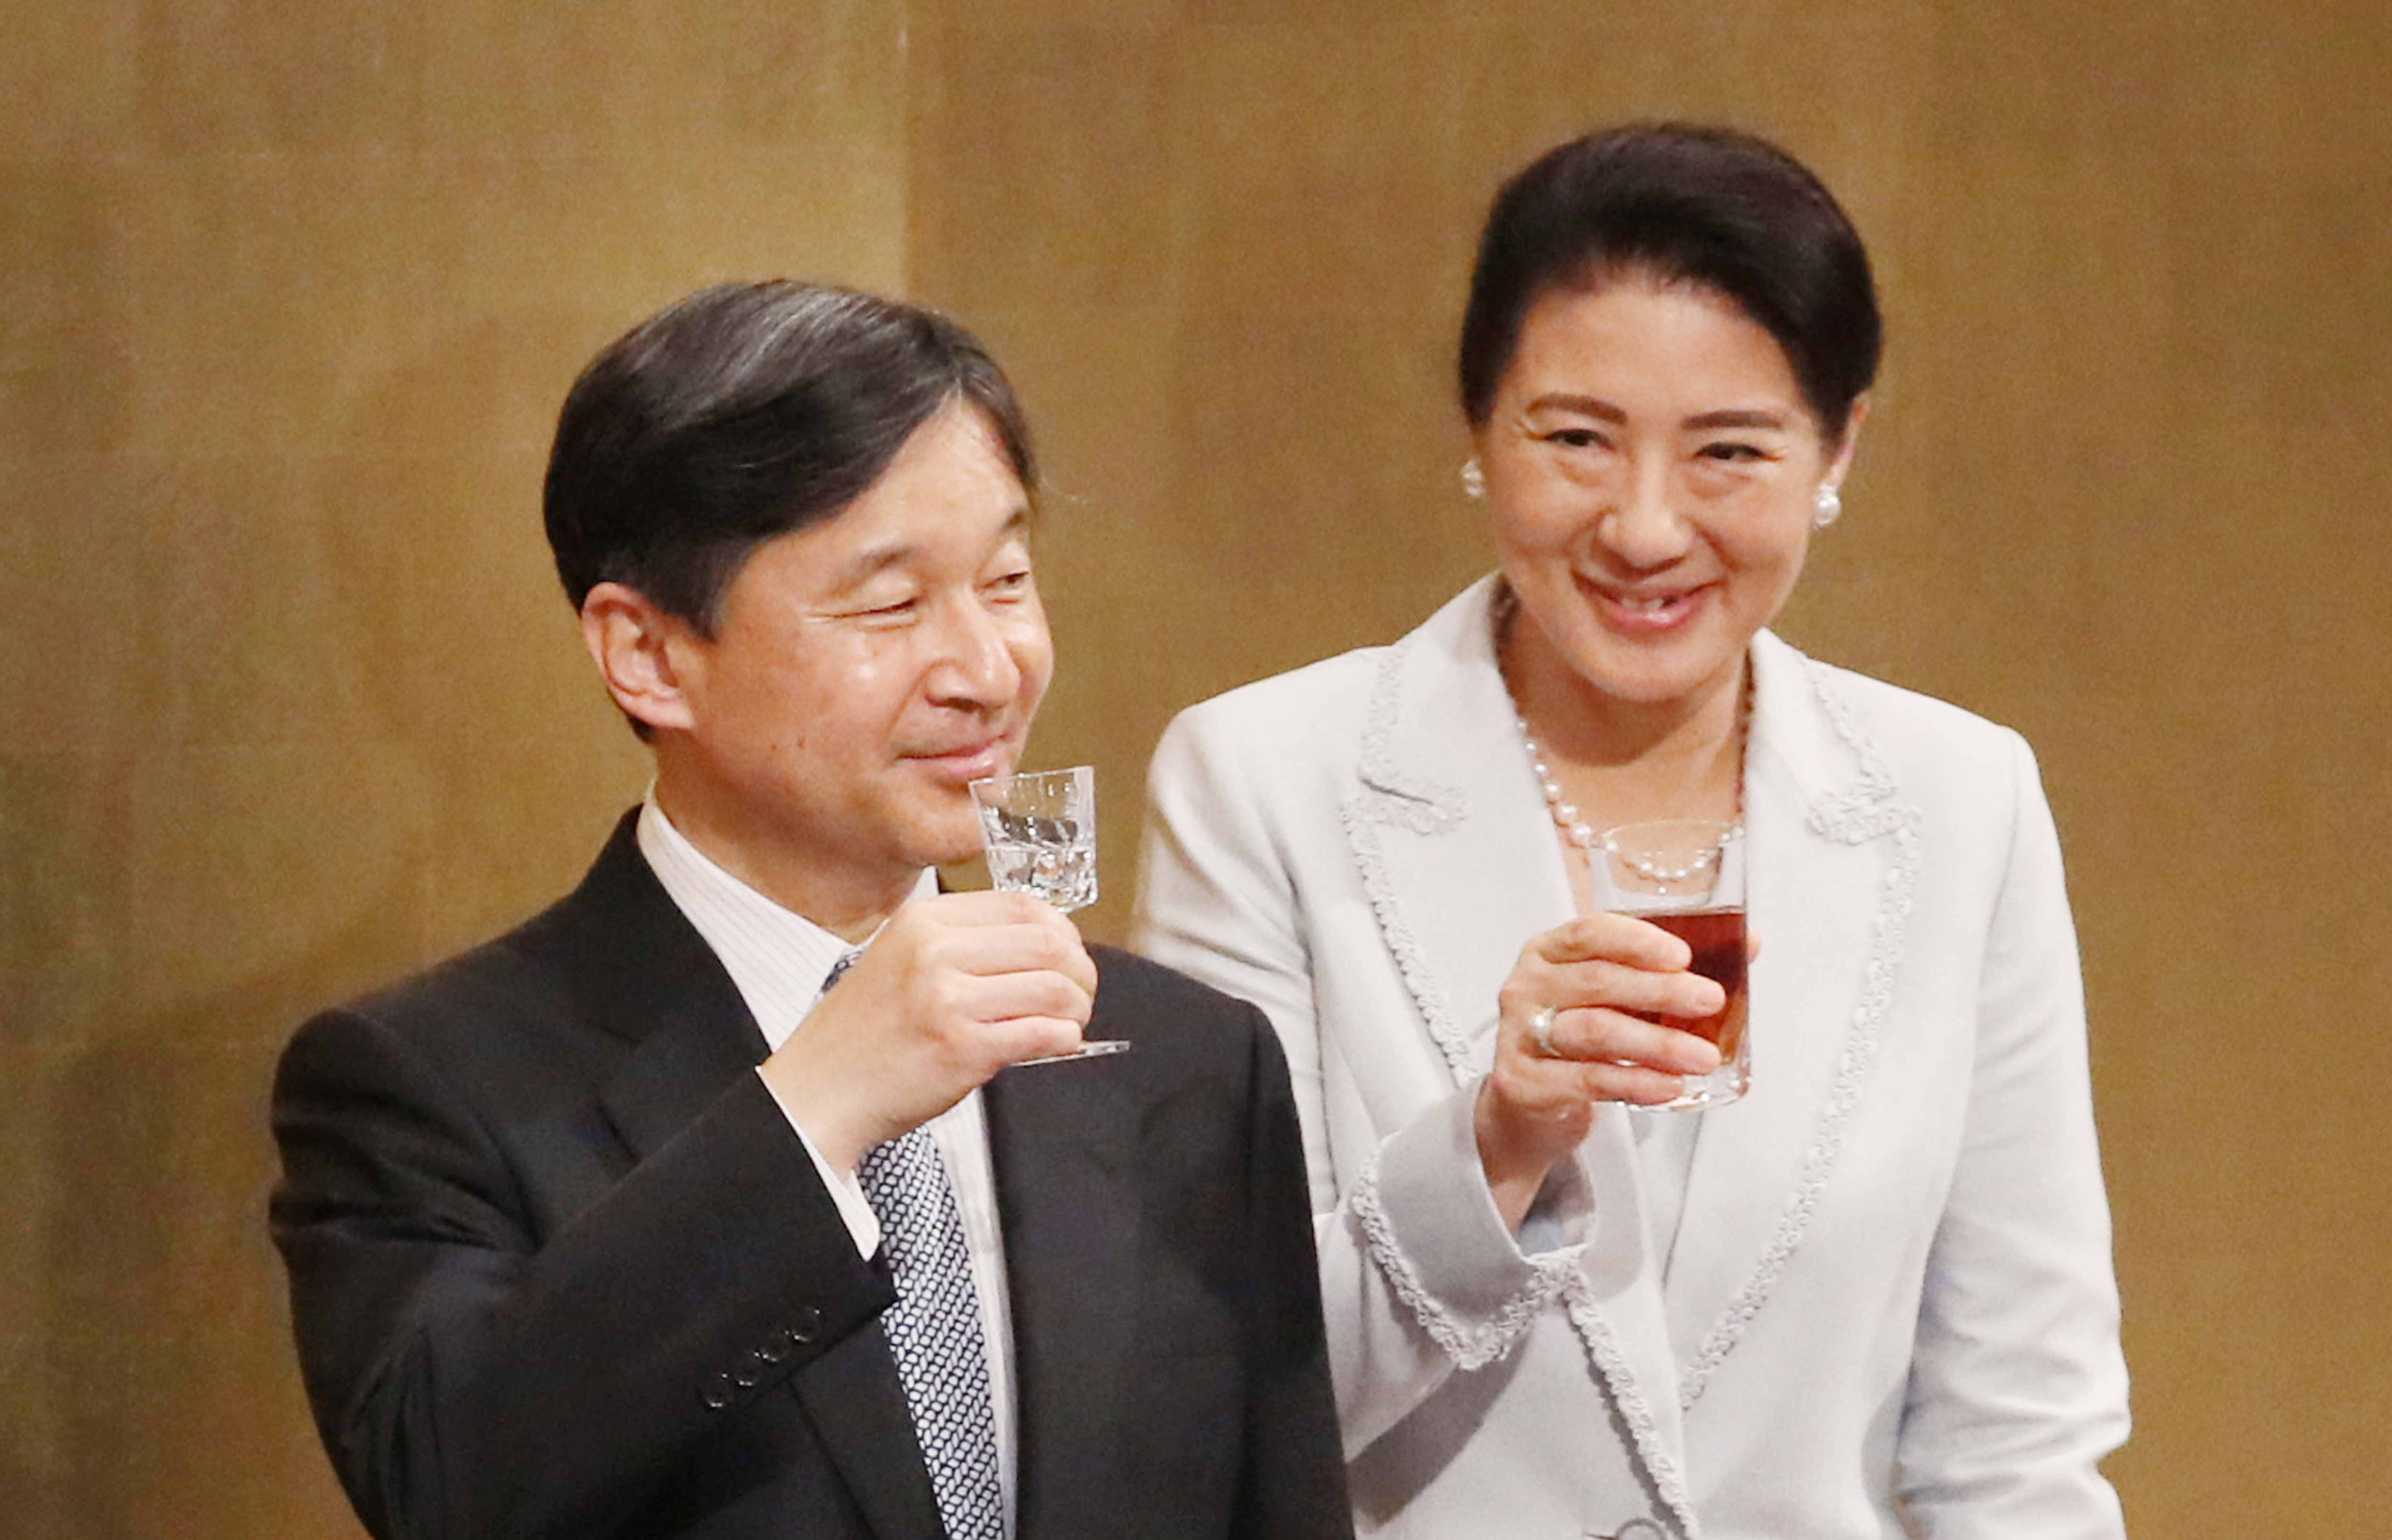 Japan's Emperor Naruhito and Empress Masako attend a reception of the tree-planting ceremony in Nagoya City, Aichi prefecture on June 1, 2019.